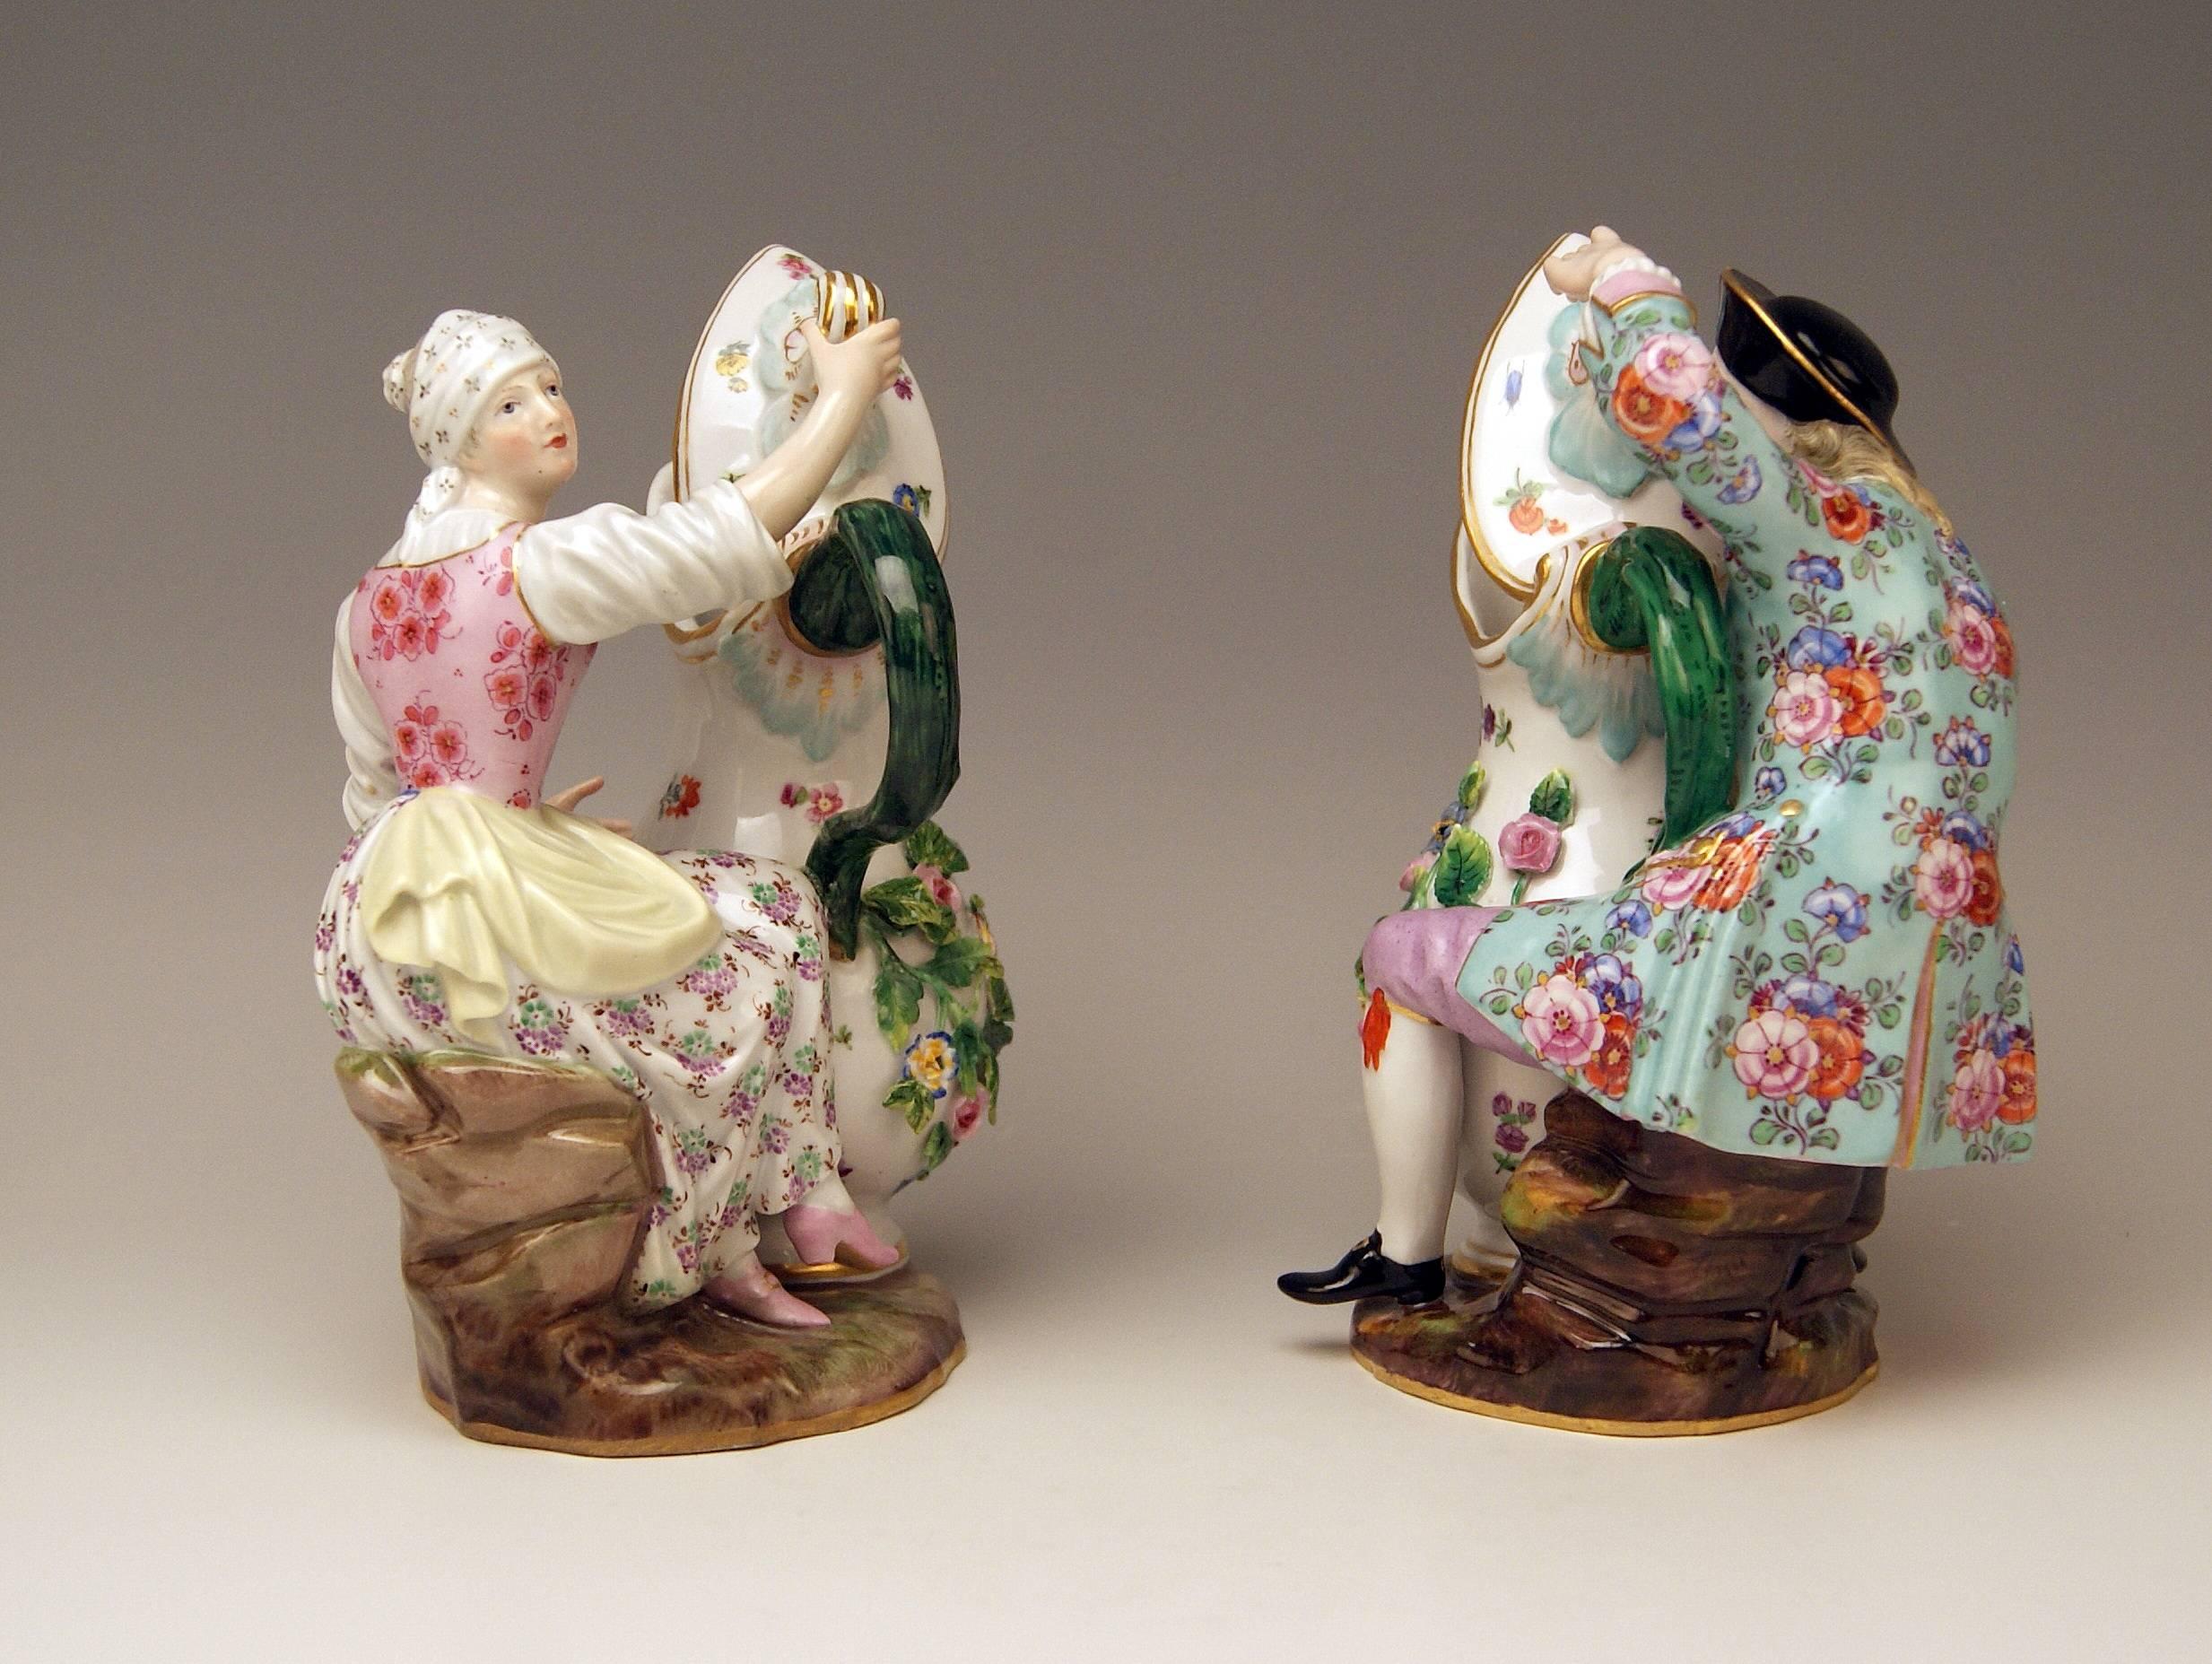 Rococo Meissen Pair of Figurines with Jug Pitcher by Eberlein Models 1234 907 made 1850 For Sale